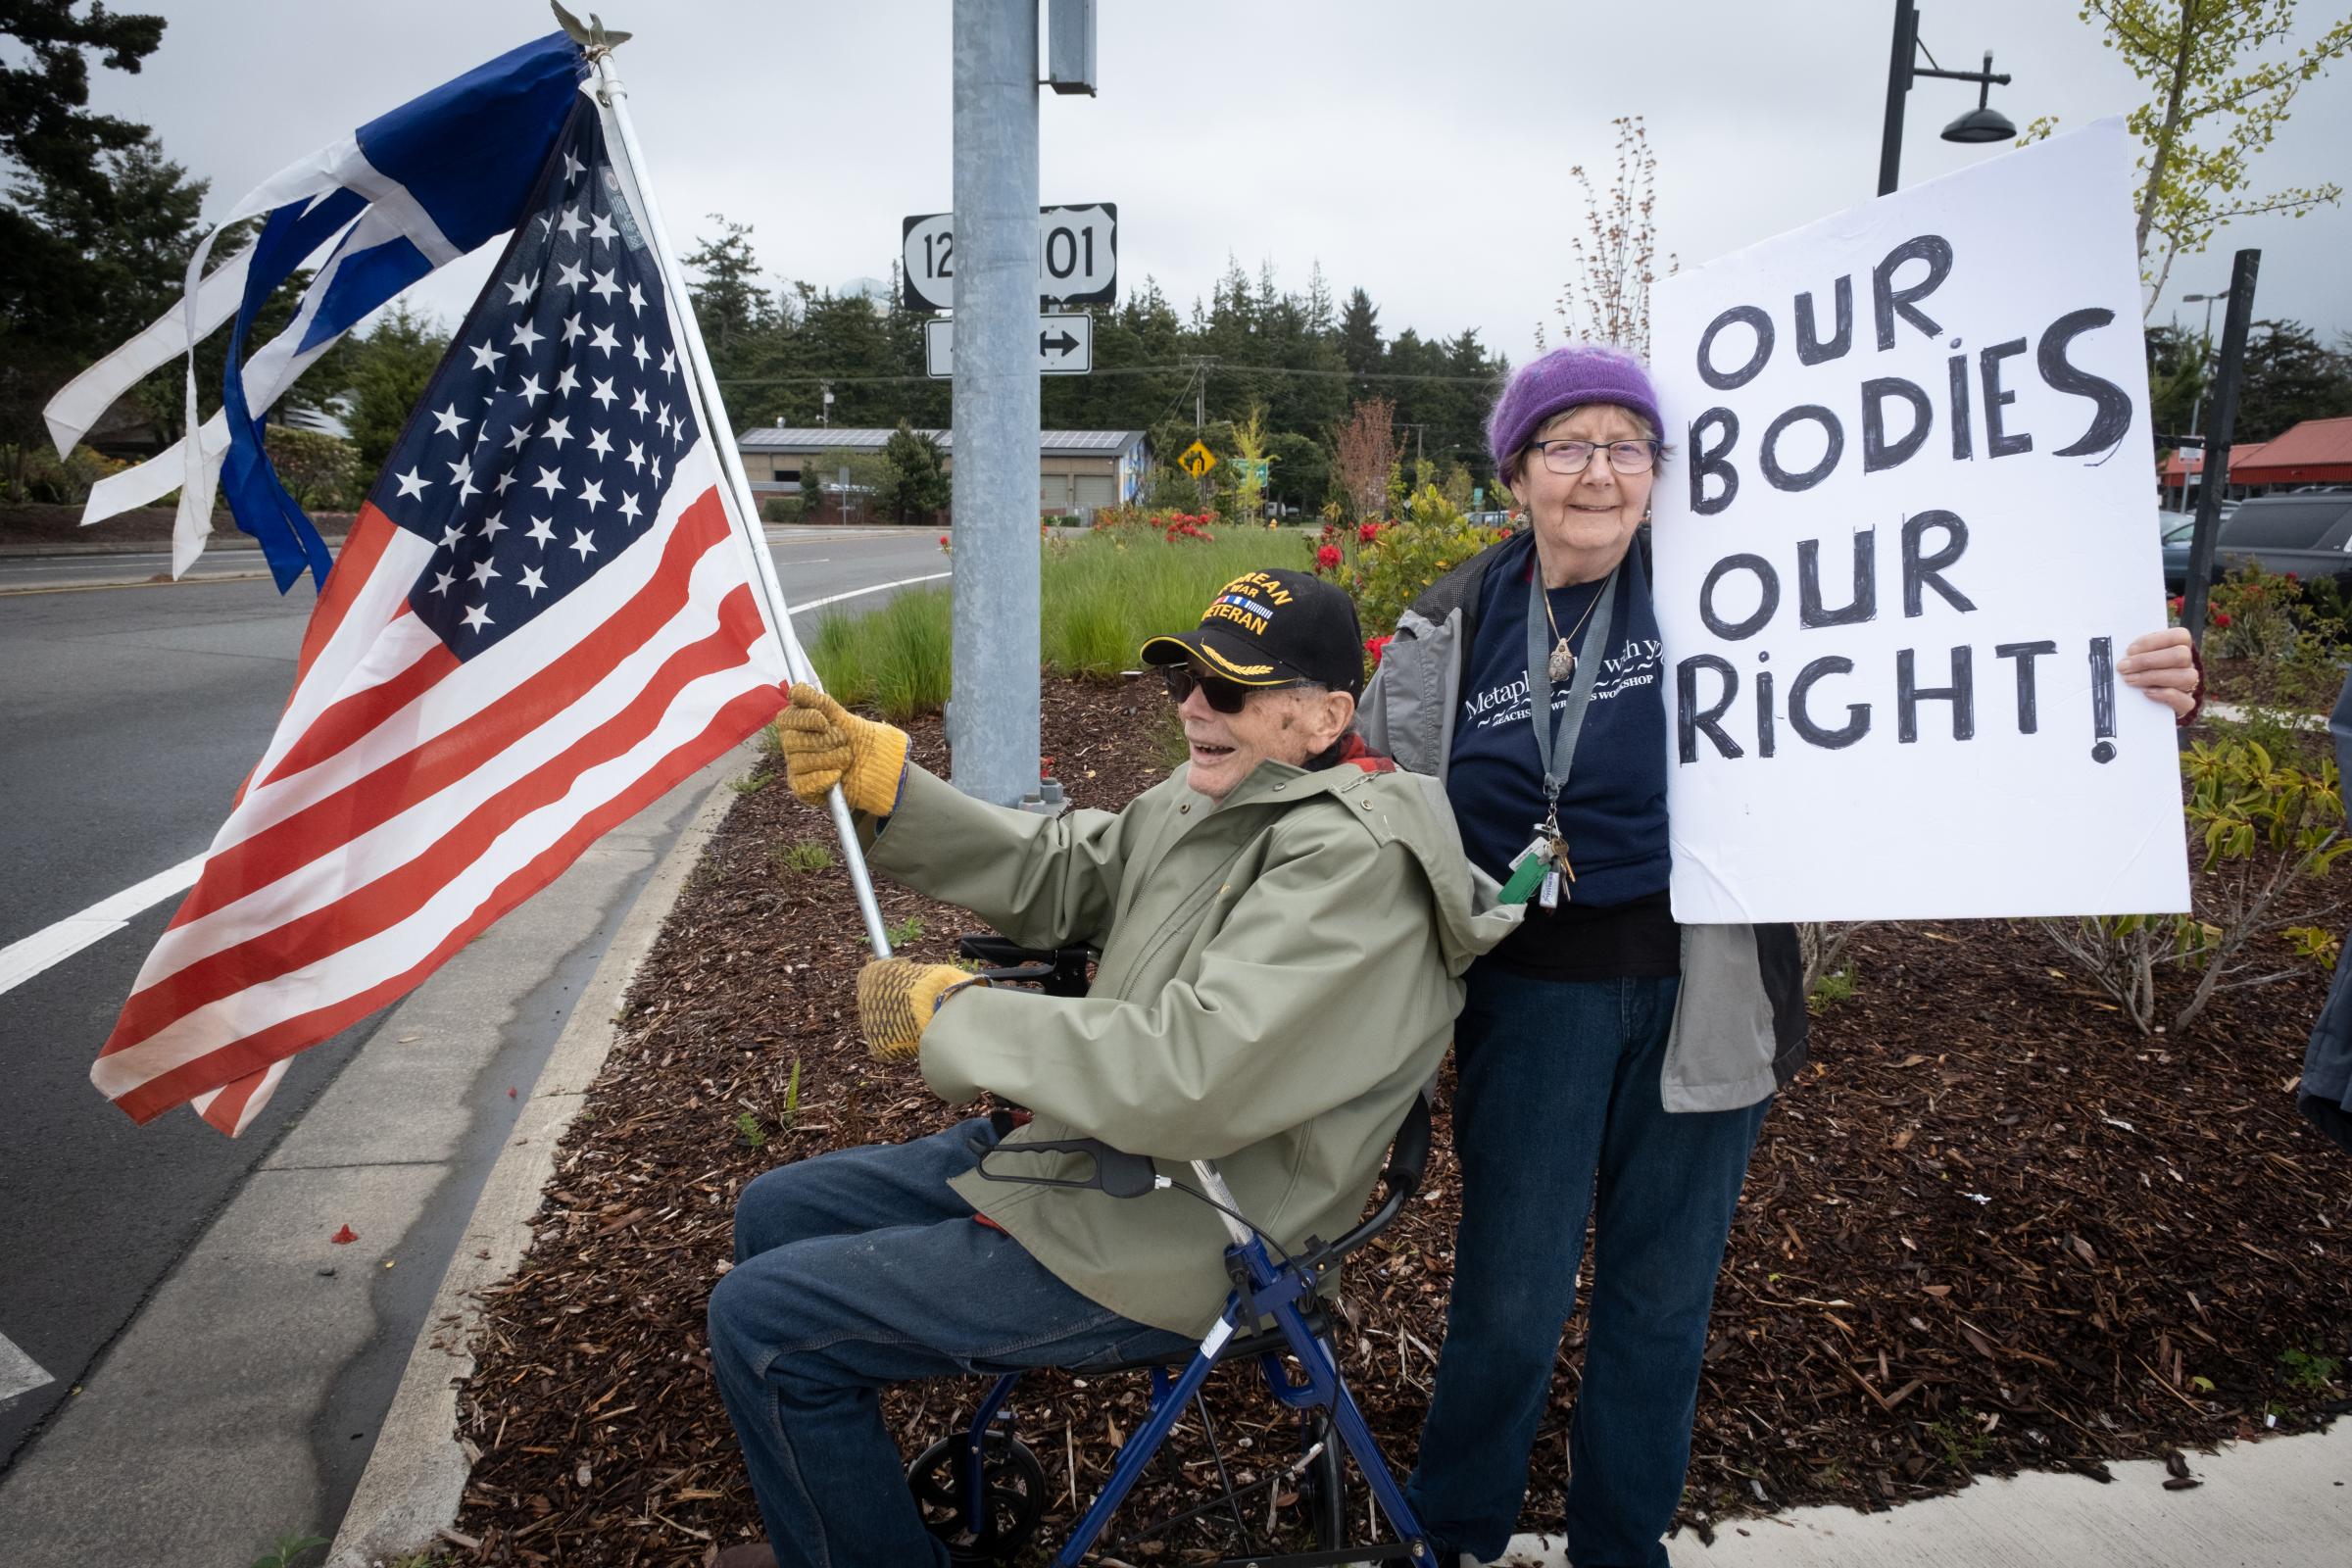 Bans Off Our Bodies Rally Florence Oregon - Veteran with American flag and women with Our Bodies Our Right sign, Bans Off Our Bodies protest,...